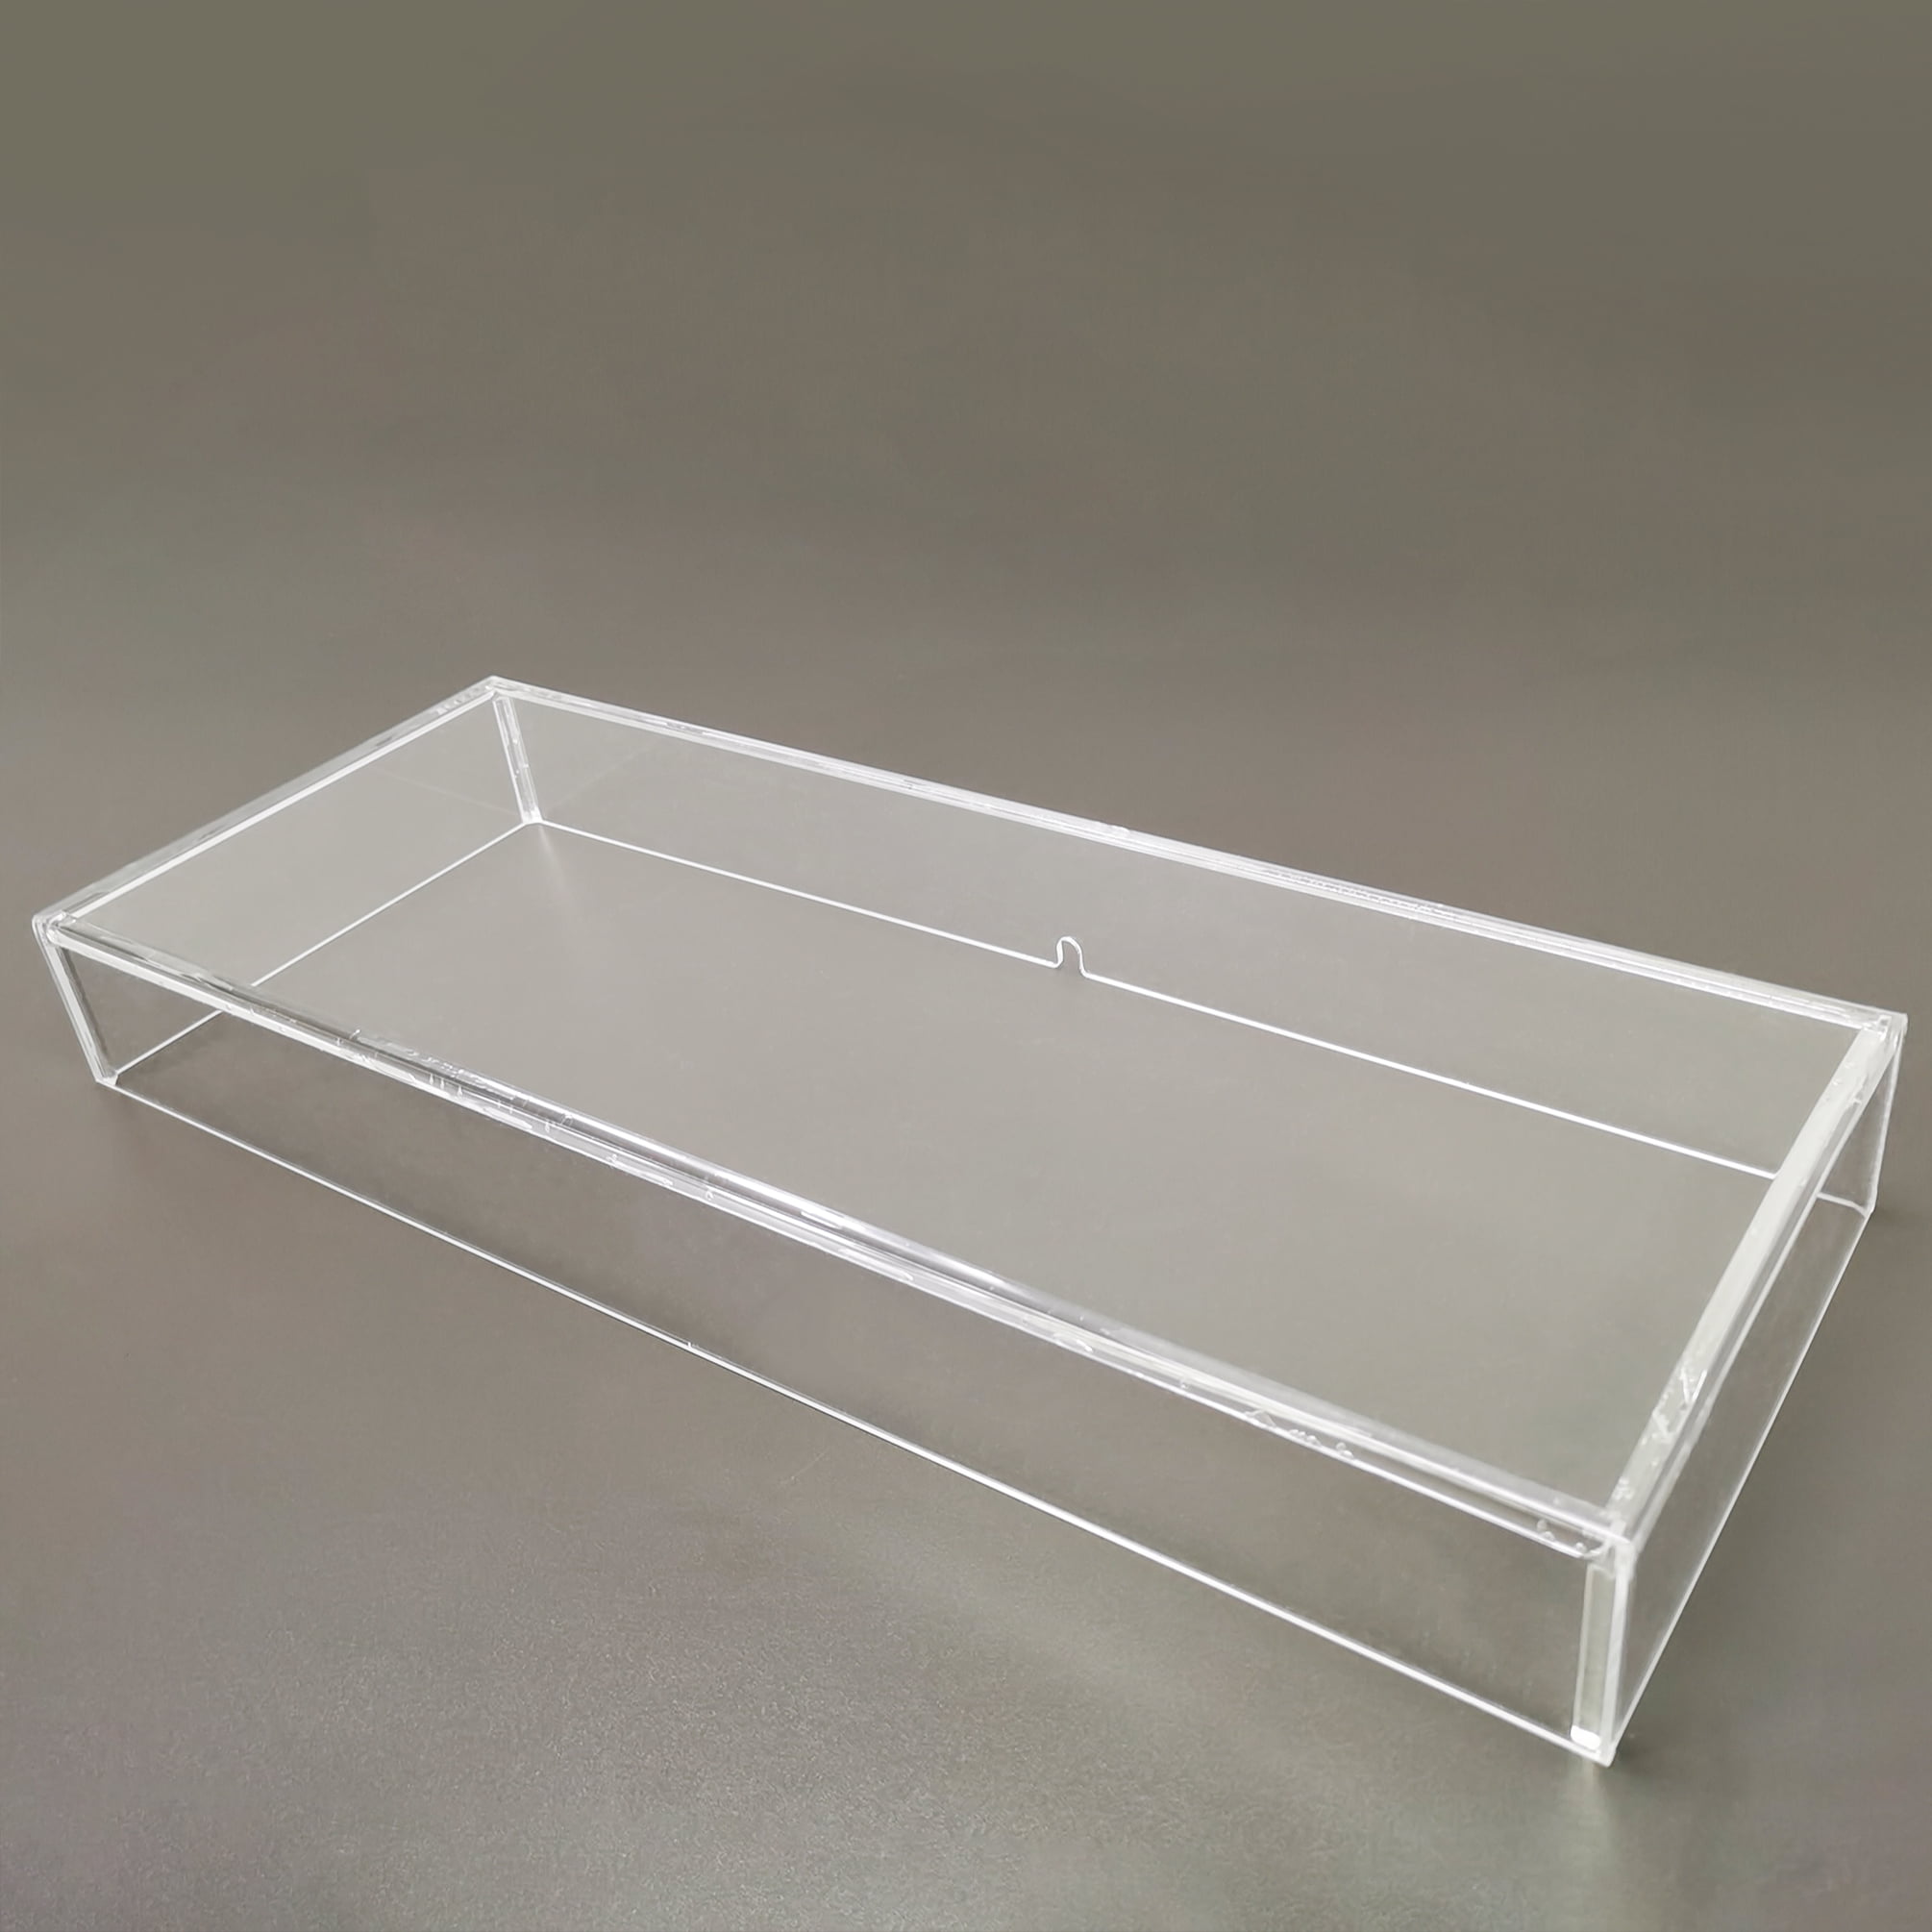 FixtureDisplays 5mm Thick Clear Acrylic Plexiglass Sheet 9 x 9 Square  Pre-drilled with 4 Countersink